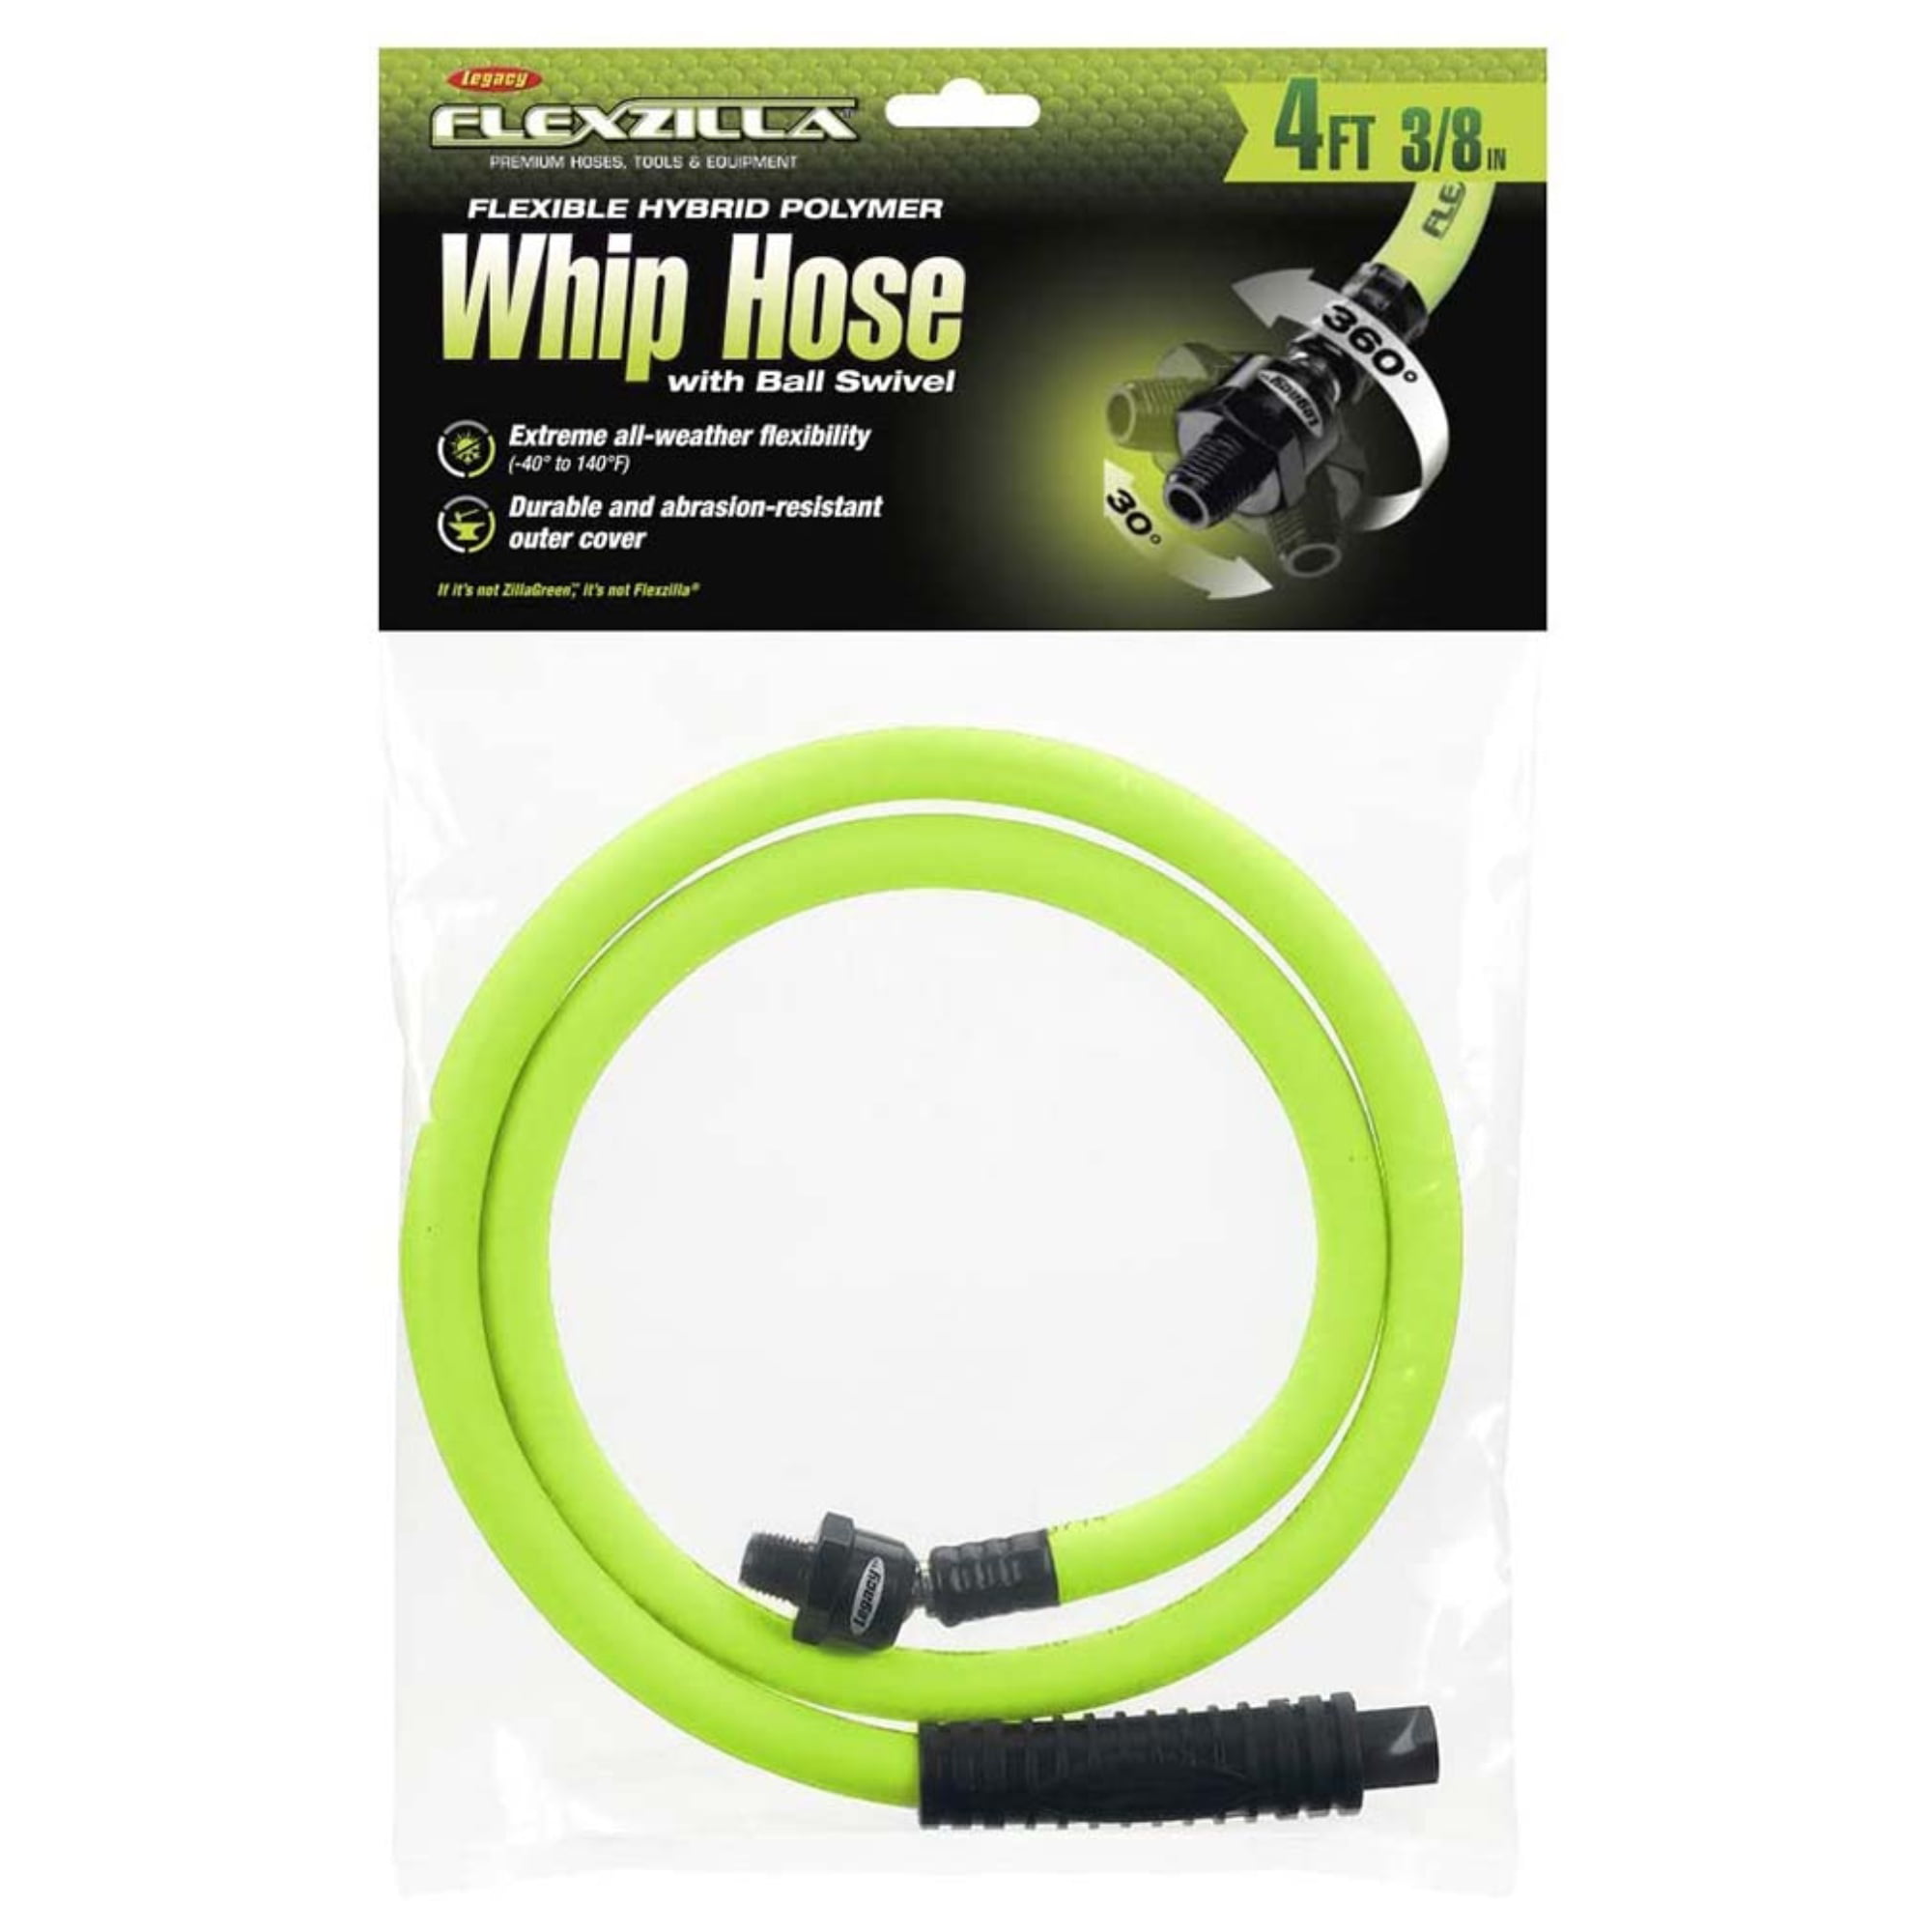 Flexzilla 3/8" x 4' FT Air Hose Whip With Ball Swivel 